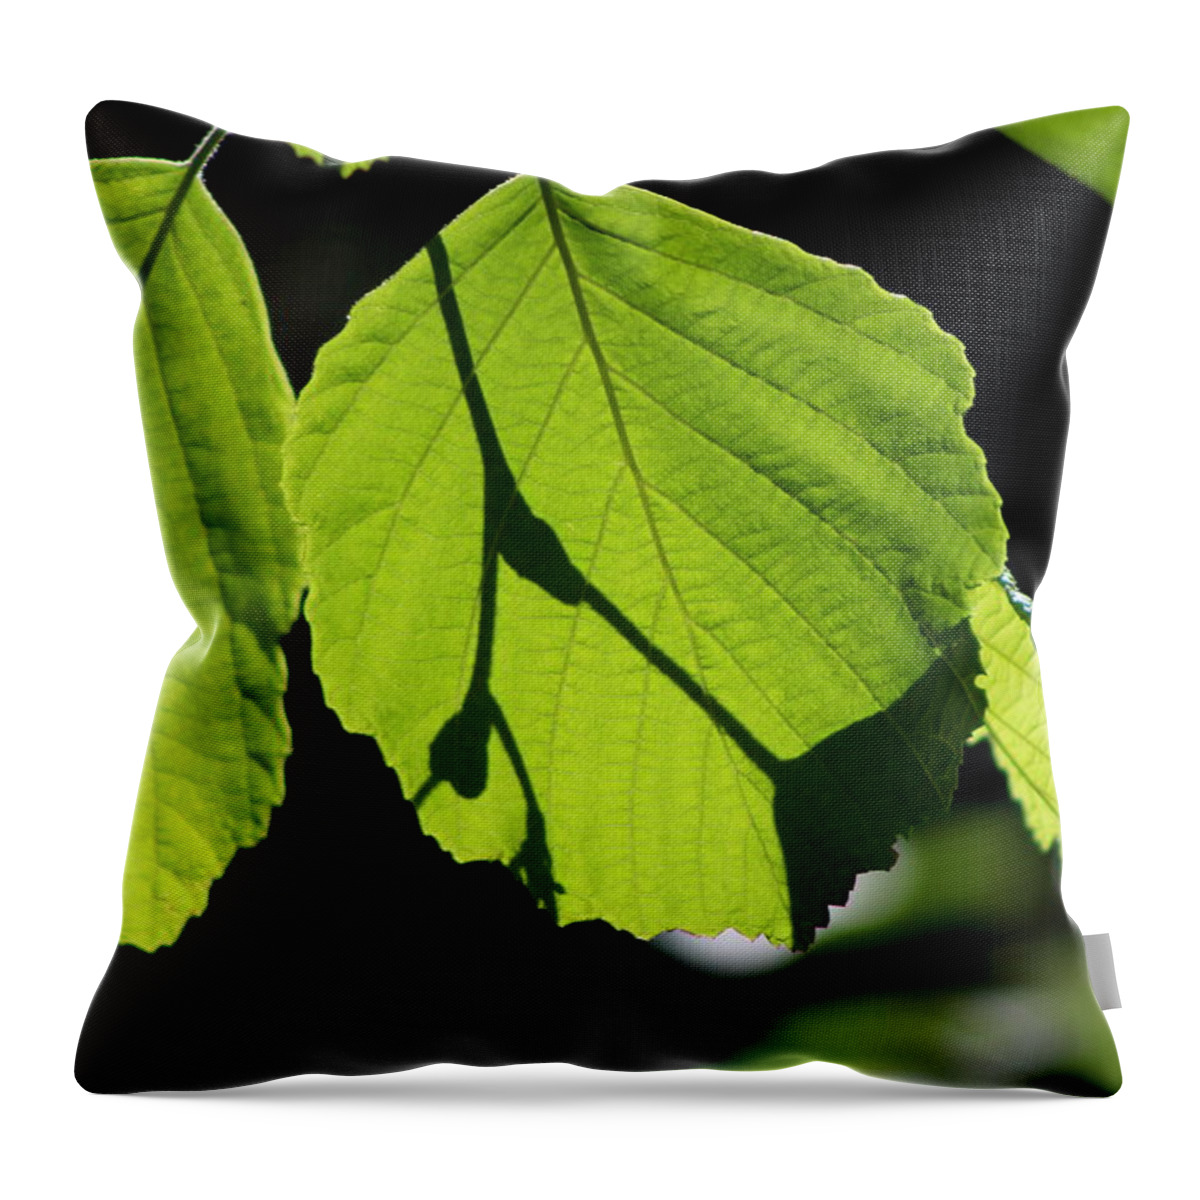 Bright Green Throw Pillow featuring the photograph Iridescent Glow - Beechnut Leaves by Colleen Cornelius